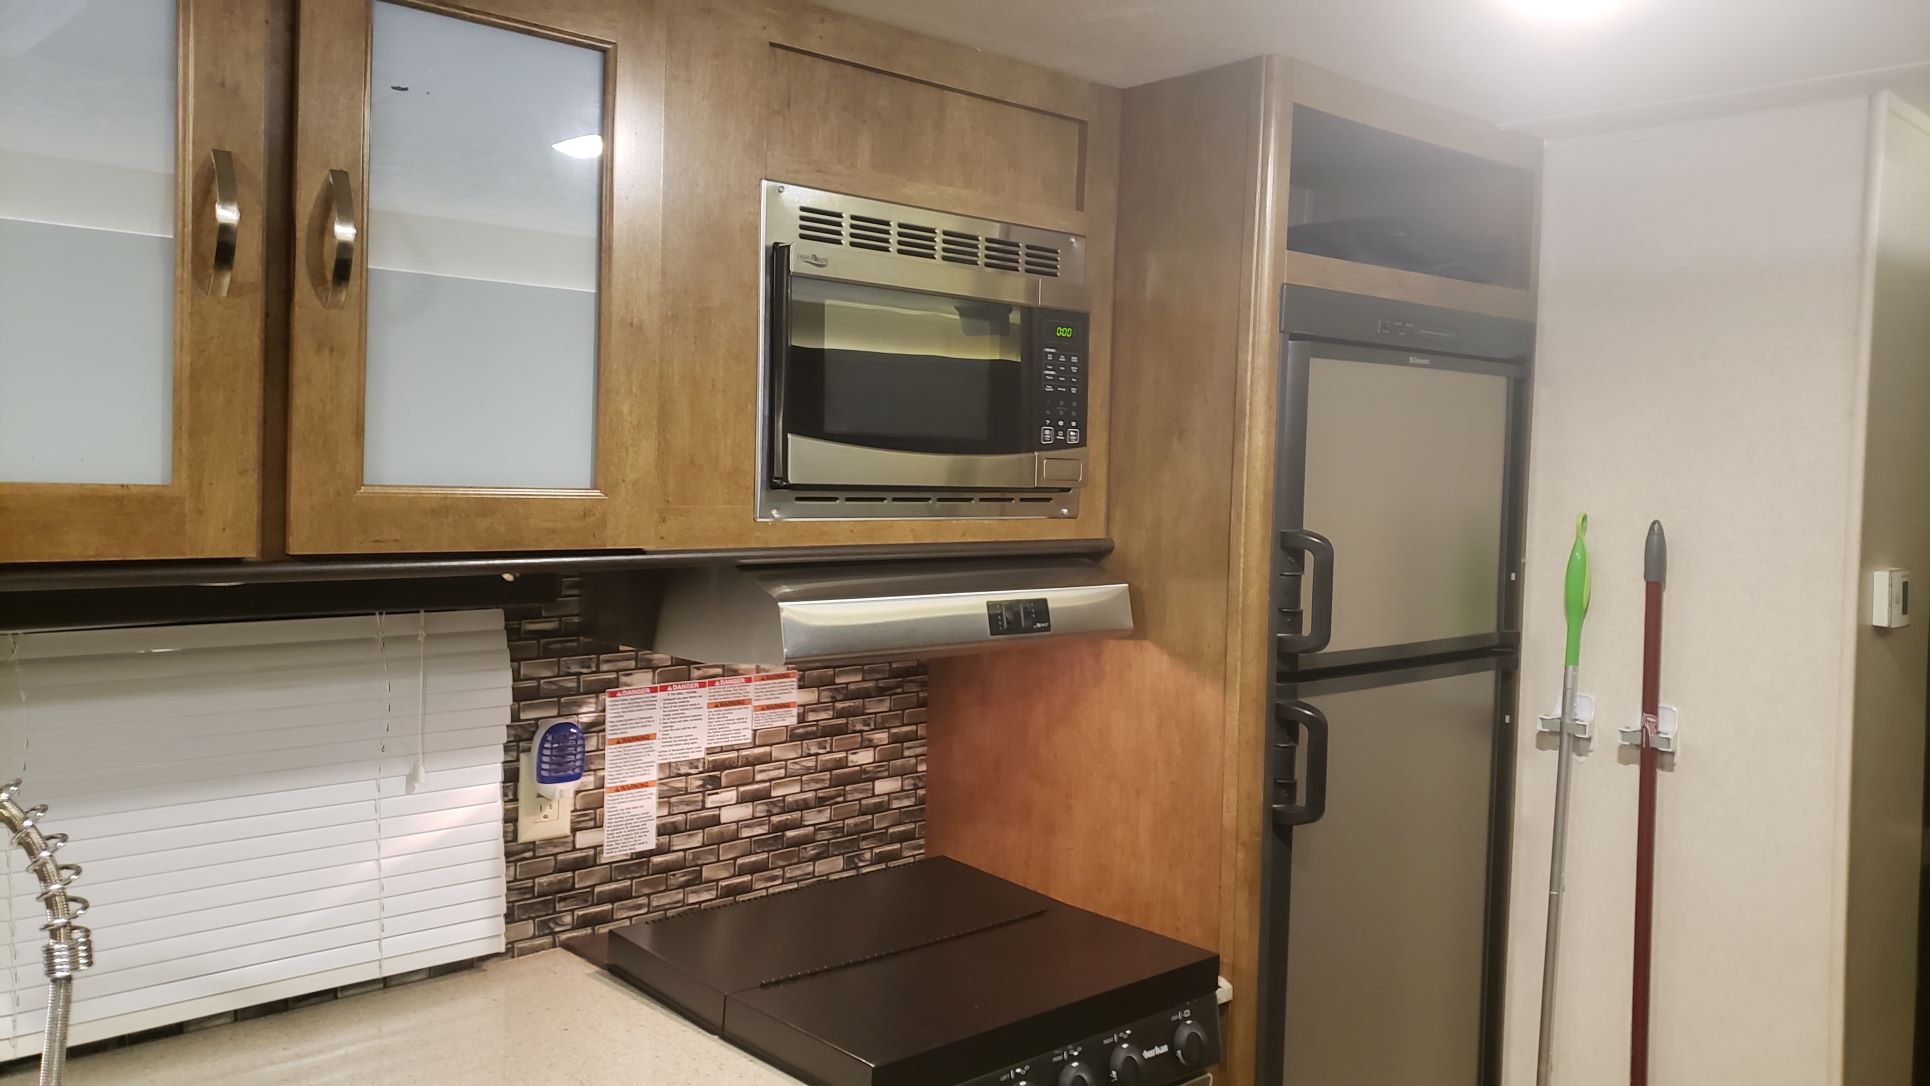 How to Secure a Microwave in an RV